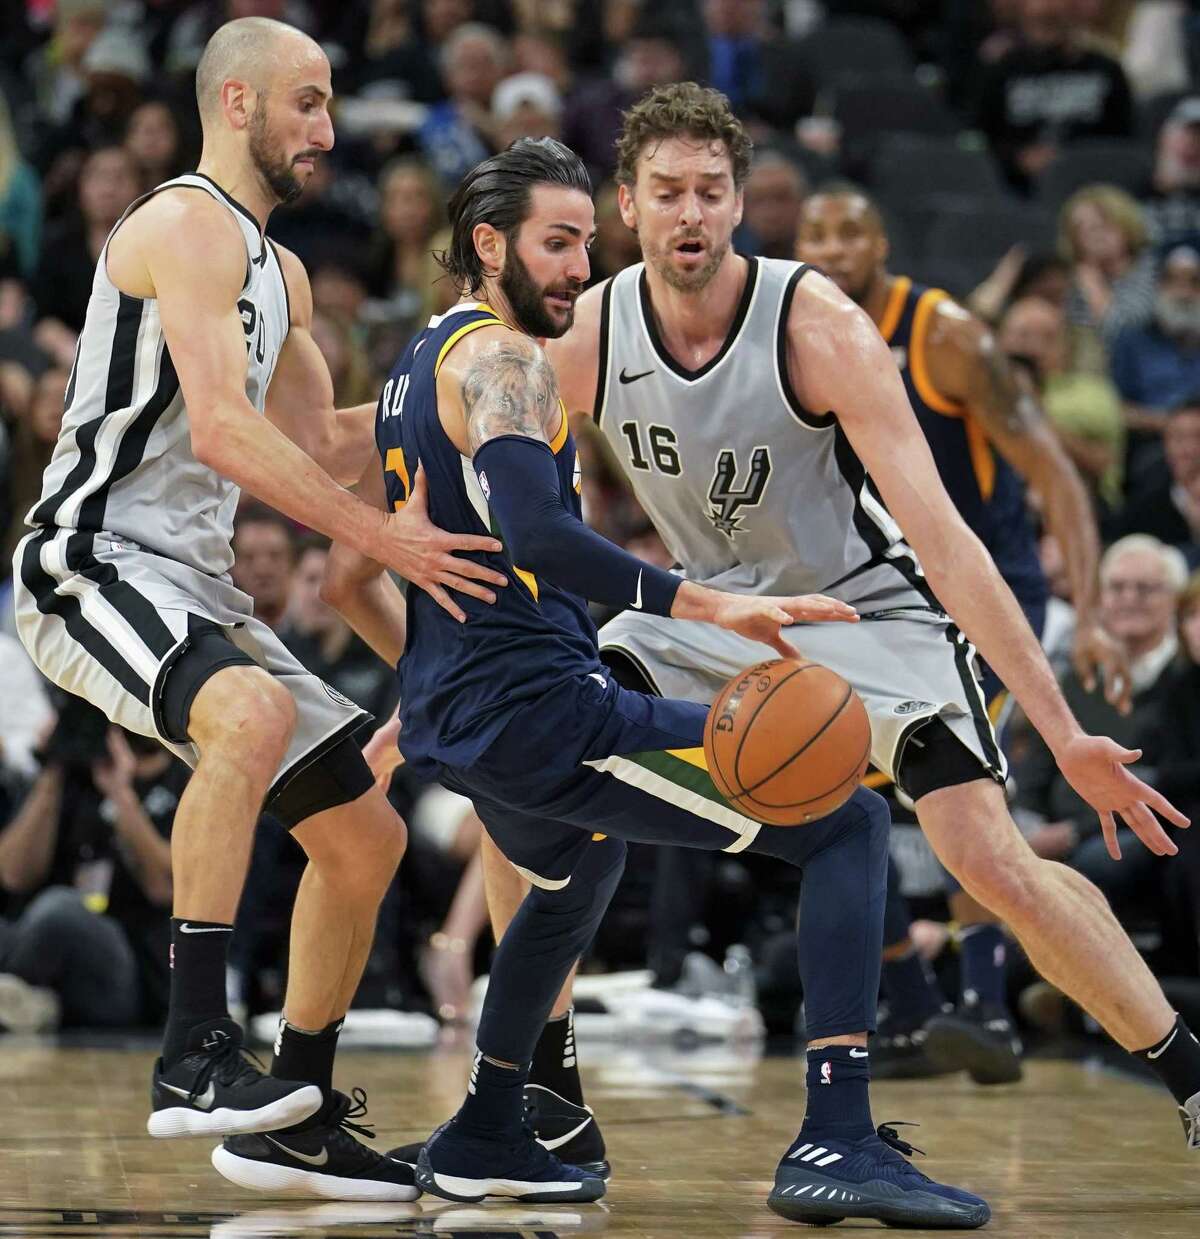 Utah Jazz' Ricky Rubio, center, loses the ball as he is guarded by San Antonio Spurs' Pau Gasol (16) and Manu Ginobili during the first half of an NBA basketball game, Saturday, Feb. 3, 2018, in San Antonio. (AP Photo/Darren Abate)